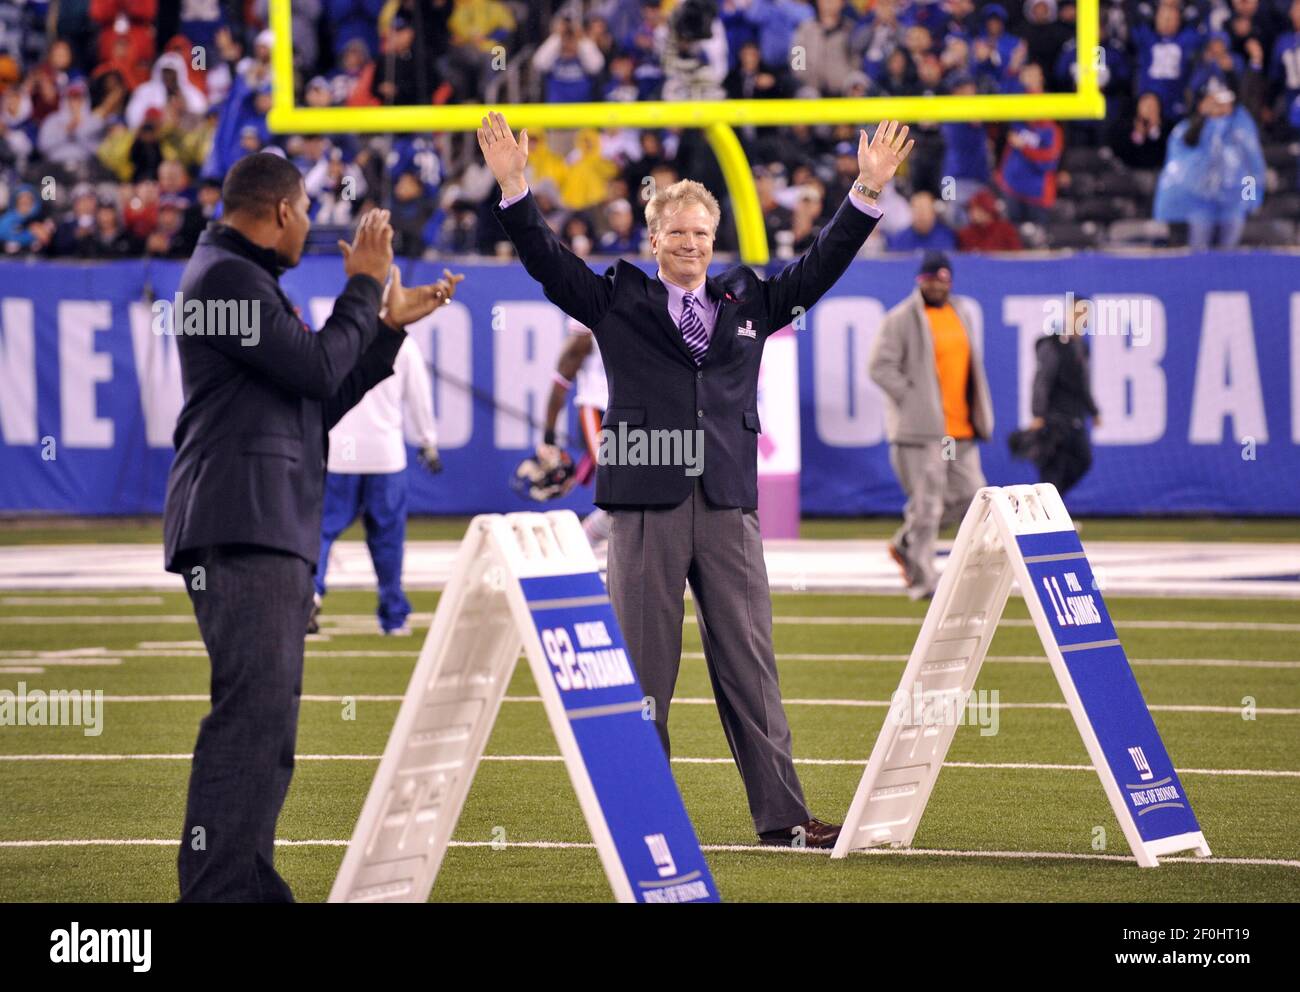 Former New York Giants Phil Simms waves to fans as he is inducted into the Giants  Ring of Honor at New Meadowlands Stadium in East Rutherford, New Jersey,  Sunday, October 3, 2010. (